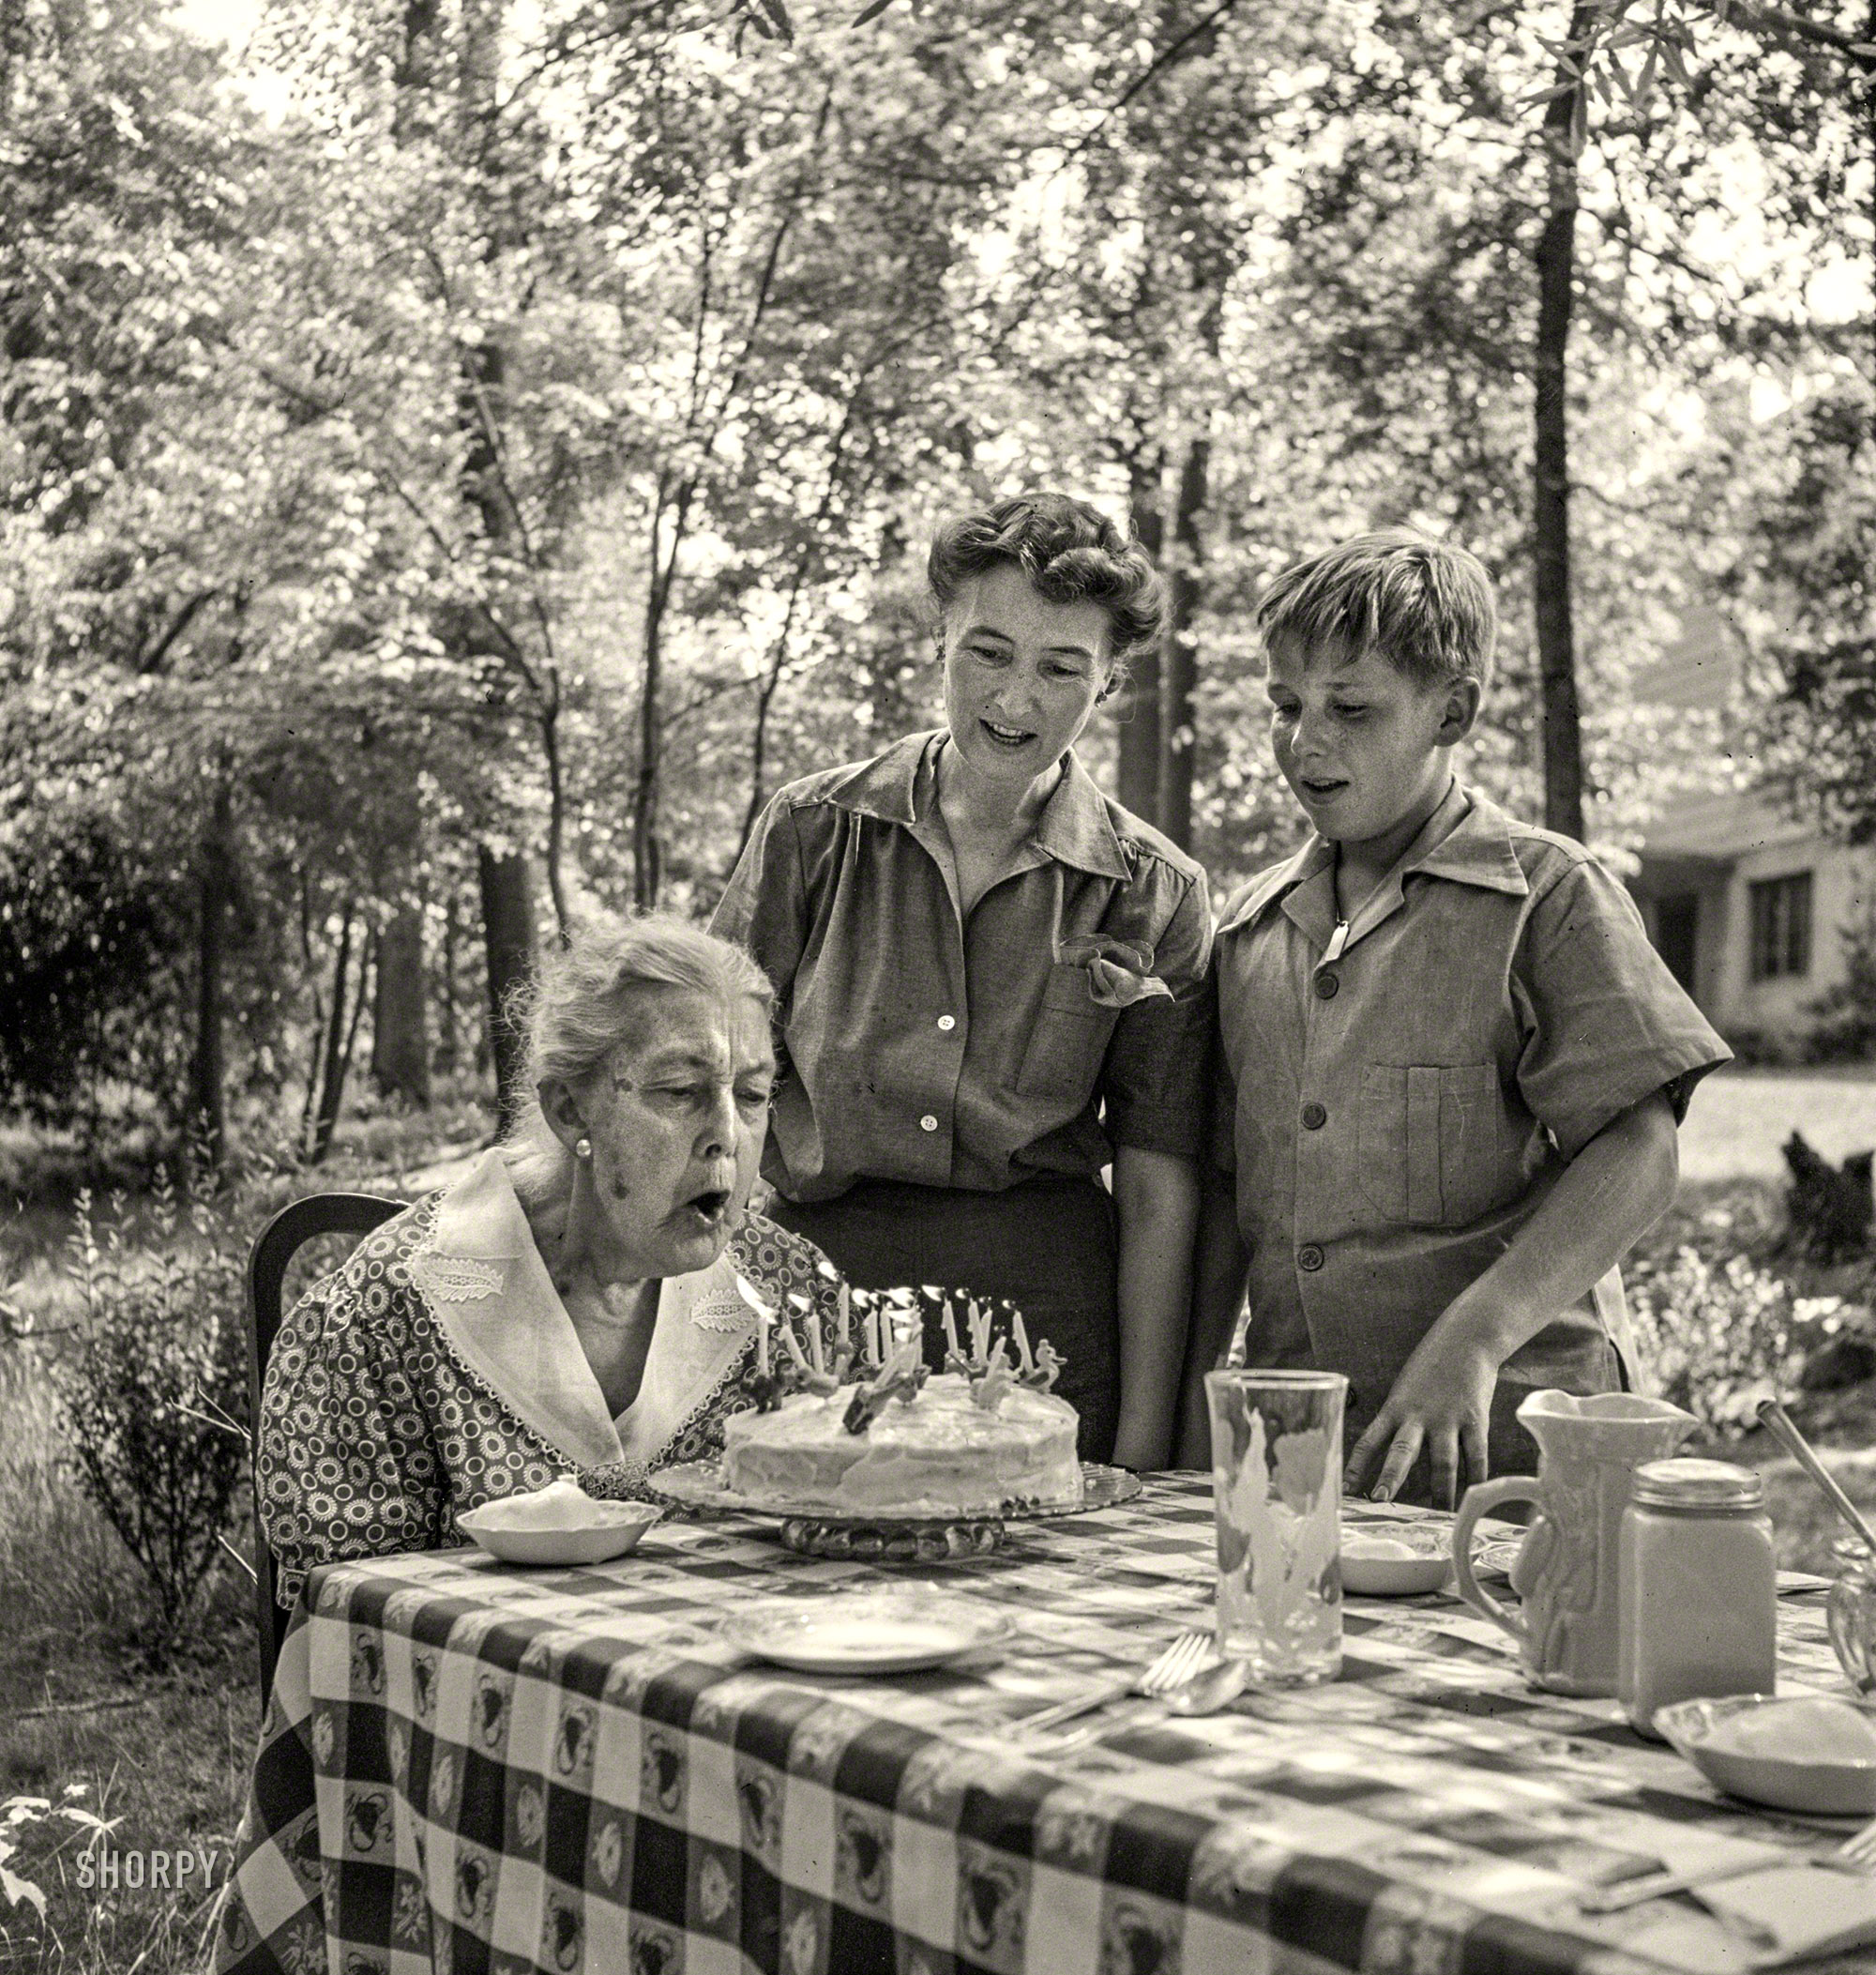 June 1942. Greenbelt, Maryland. "Grandma Taylor blows out the candles on her 83rd birthday cake while her daughter, Mrs. McCarl, and grandson look on." Photo by Marjory Collins for the Office of War Information. View full size.